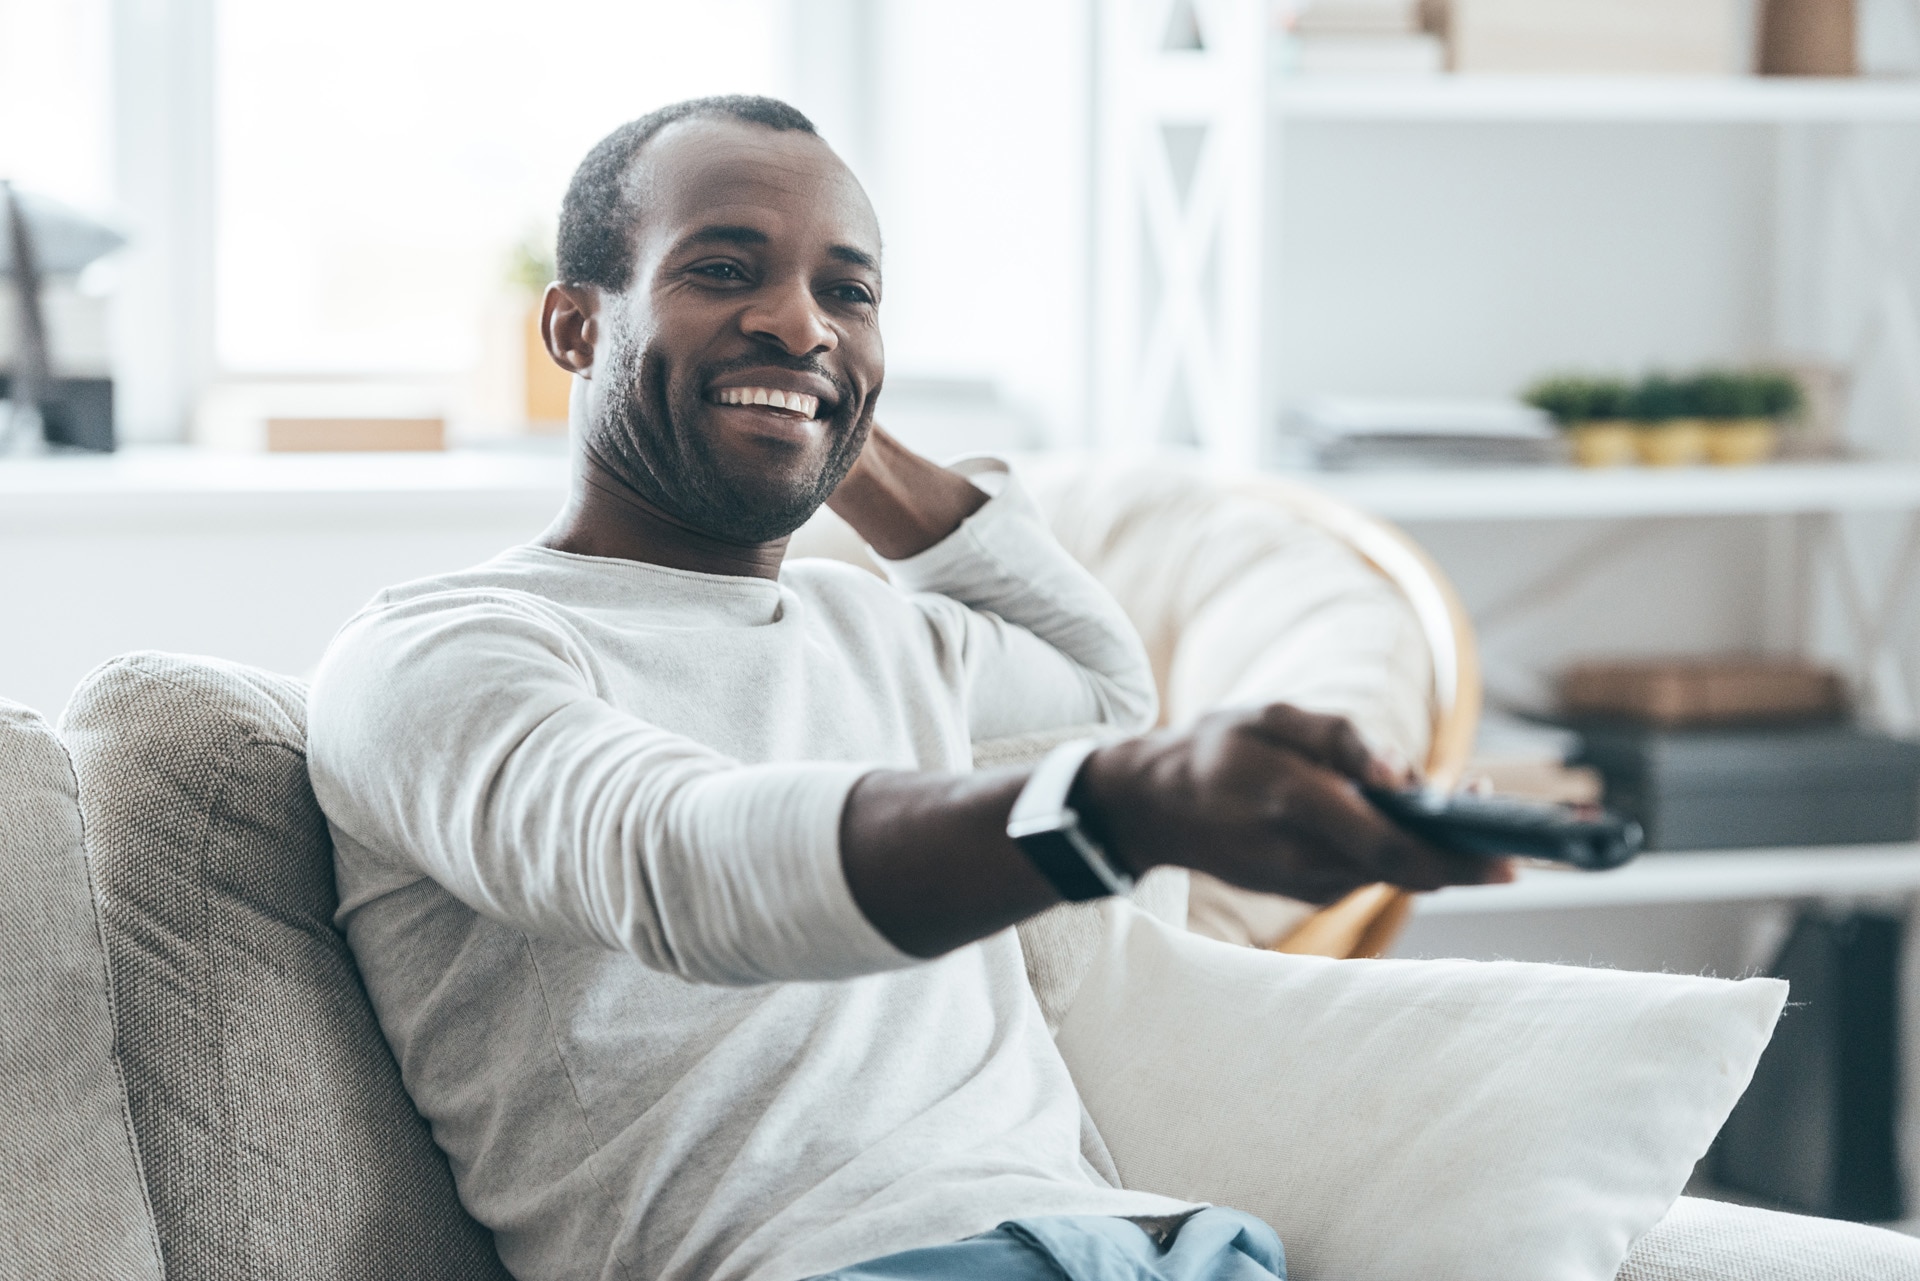 Watching TV at home. Handsome young African man watching TV and smiling while sitting on the sofa at home ; Shutterstock ID 529661191; purchase_order: -; job: -; client: -; other: -